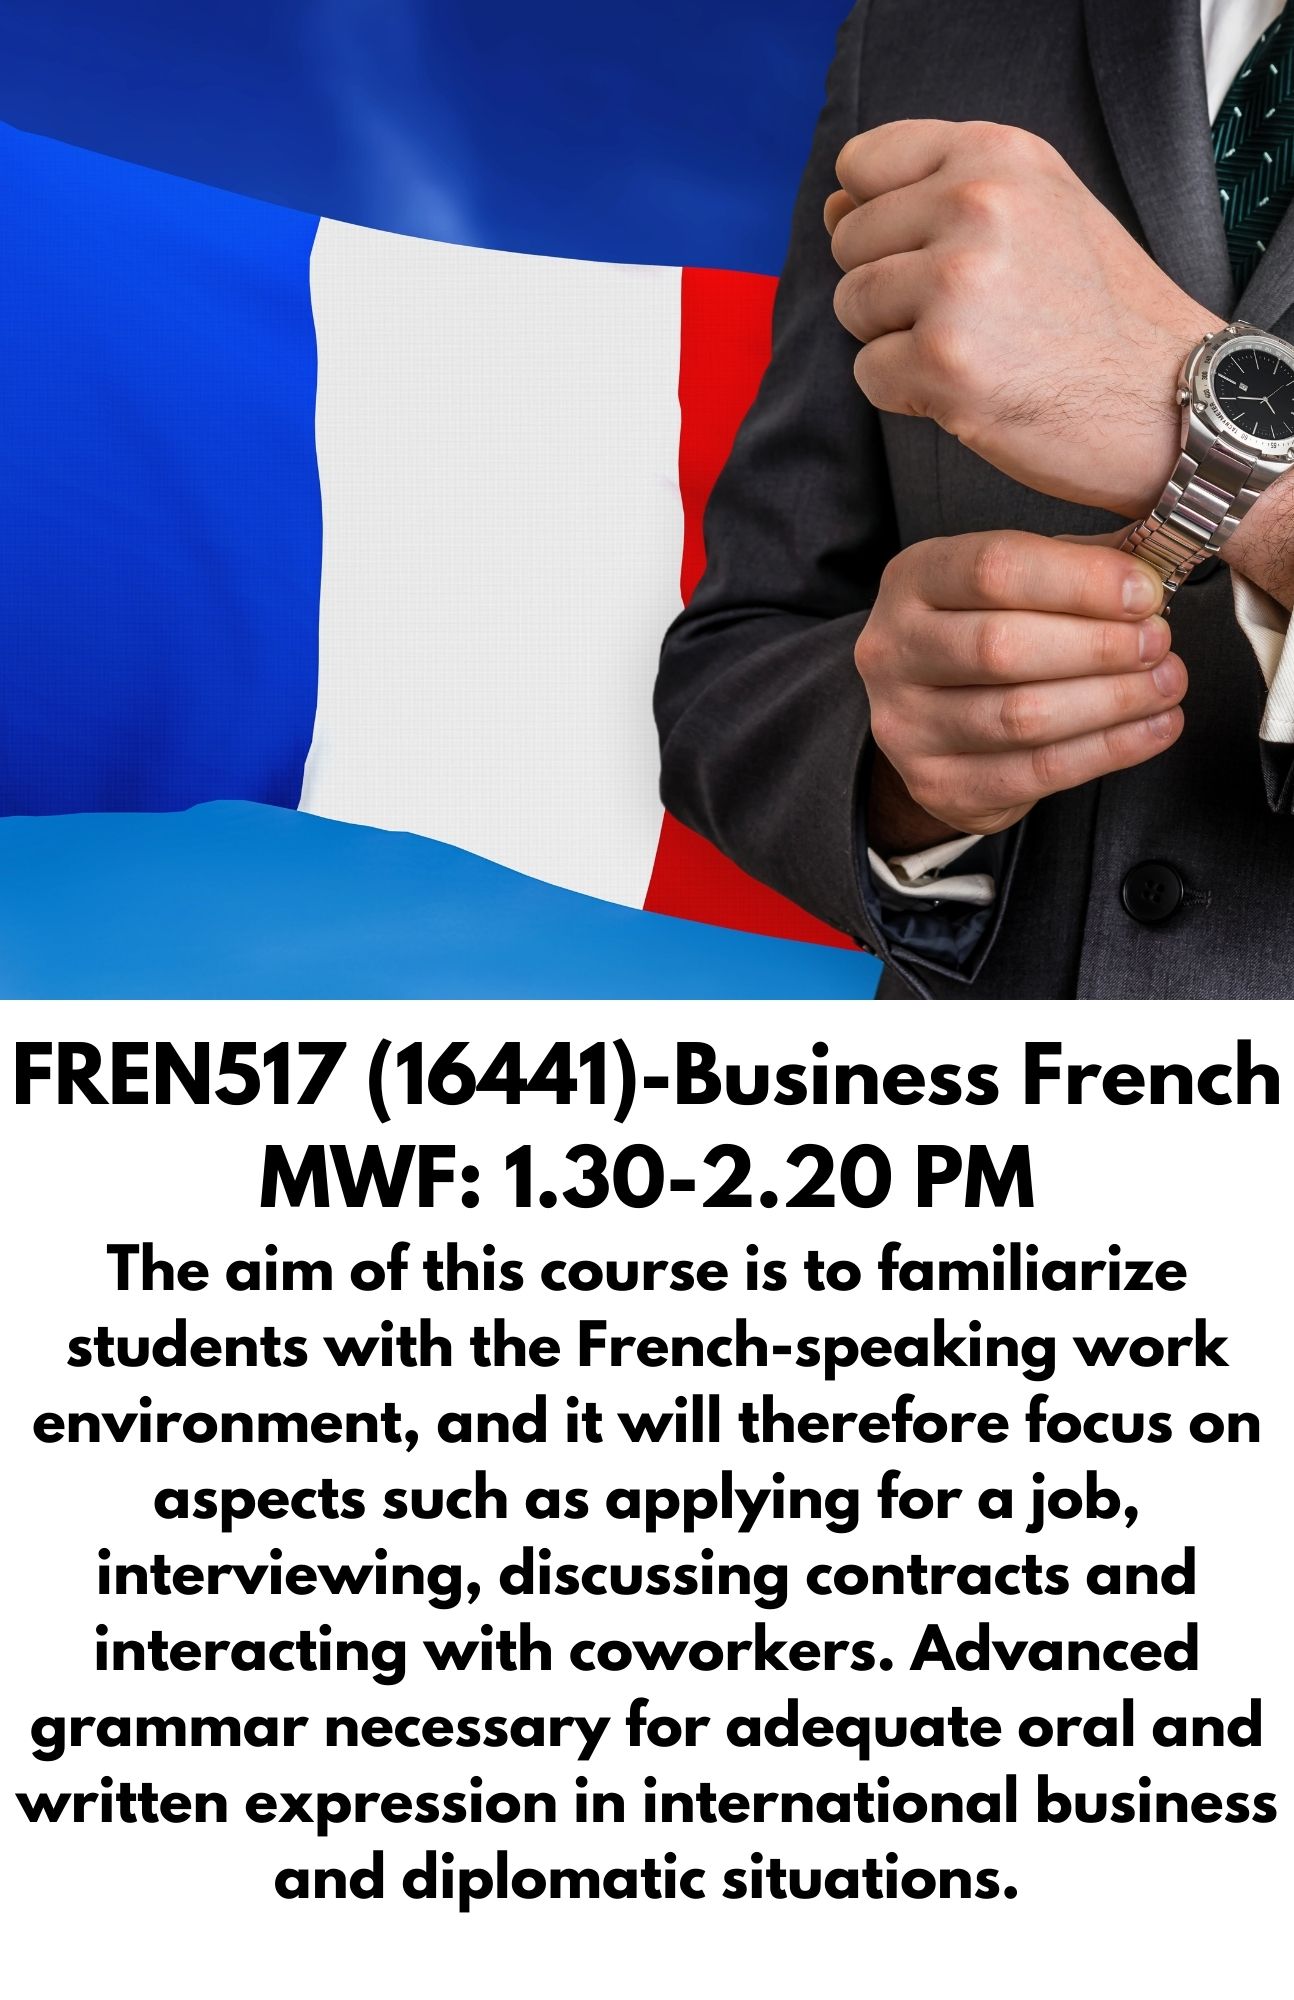 FREN517 (16441)-Business French MWF: 1.30-2.20 PM The aim of this course is to familiarize students with the French-speaking work environment, and it will therefore focus on aspects such as applying for a job, interviewing, discussing contracts and interacting with coworkers. Advanced grammar necessary for adequate oral and written expression in international business and diplomatic situations.